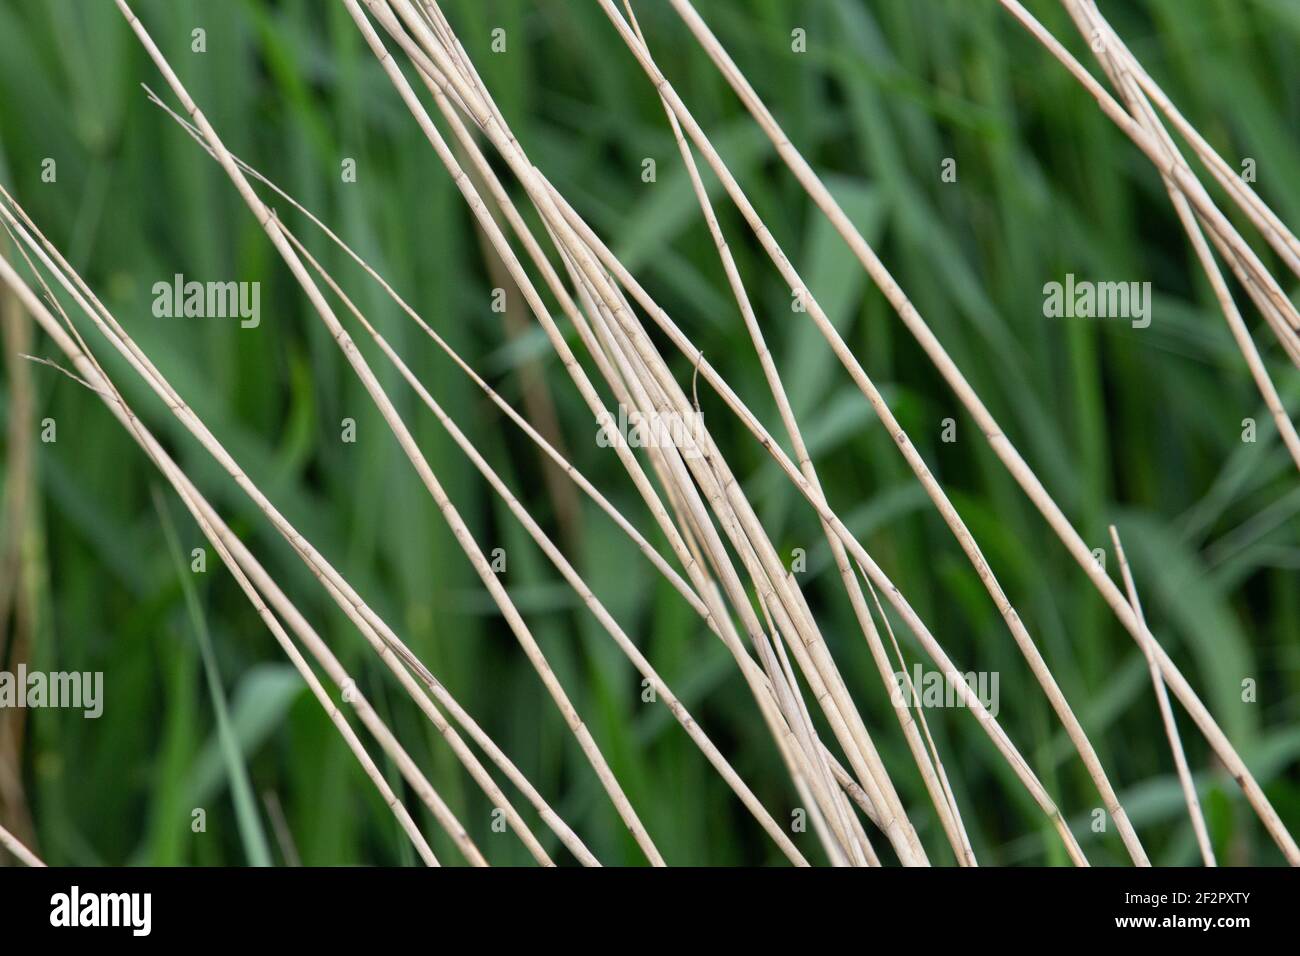 reeds waving in the wind with green reeds in the background Stock Photo